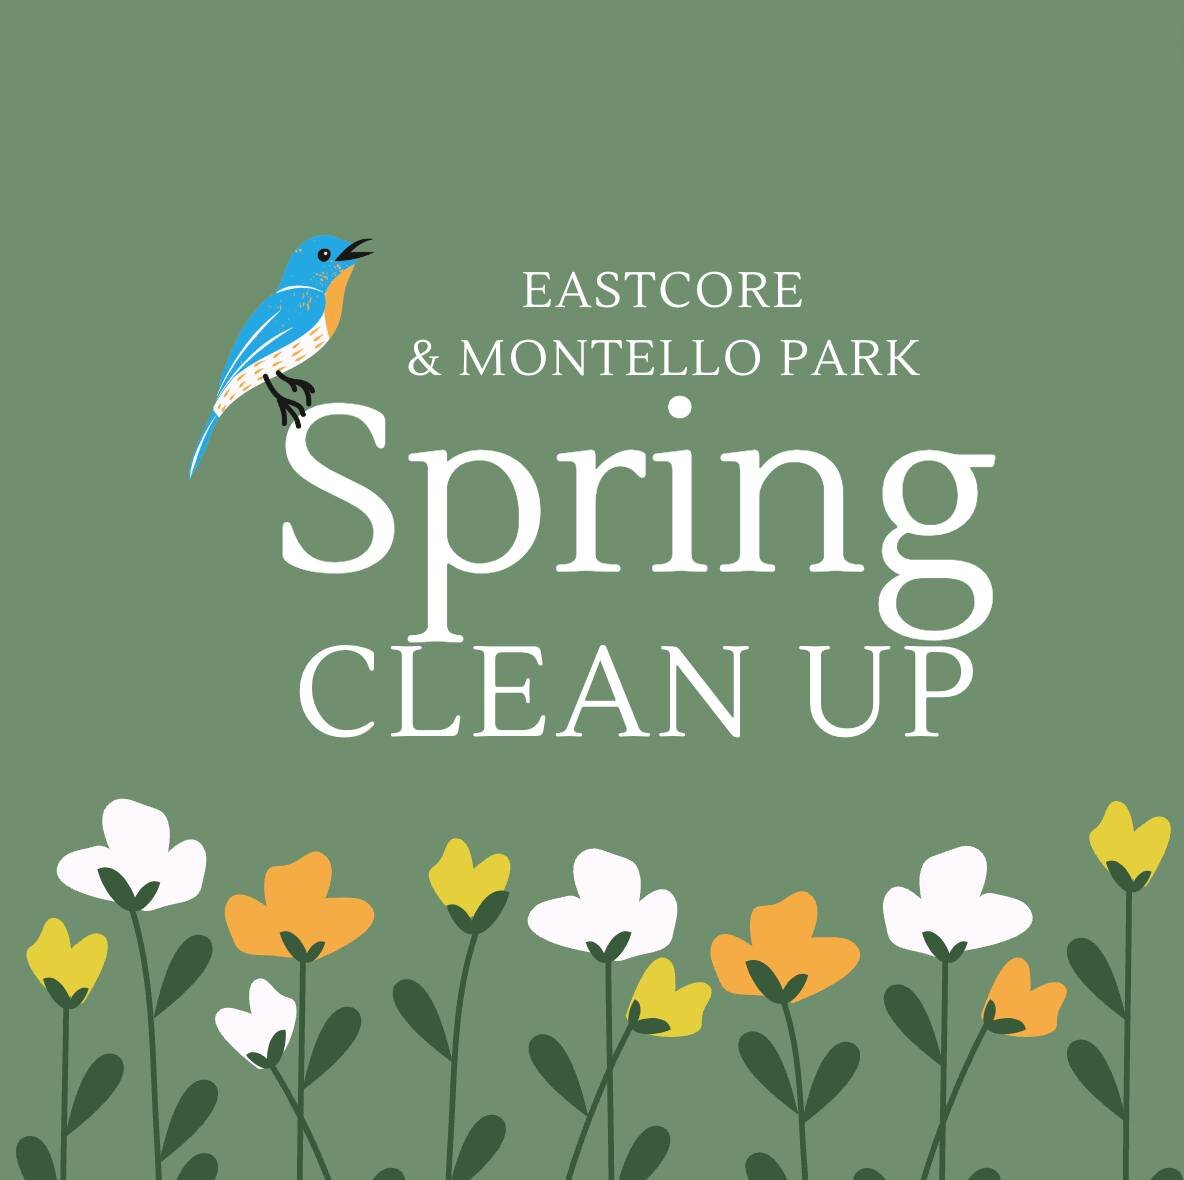 Mark your calendar for Spring Clean Up April 27th details are within our calendar at
https://www.3-sixty.org/event-calendar
.
We have 2 events in 2 different places
Eastcore &amp; Montello Park!
#signup #community #SpringCleanup